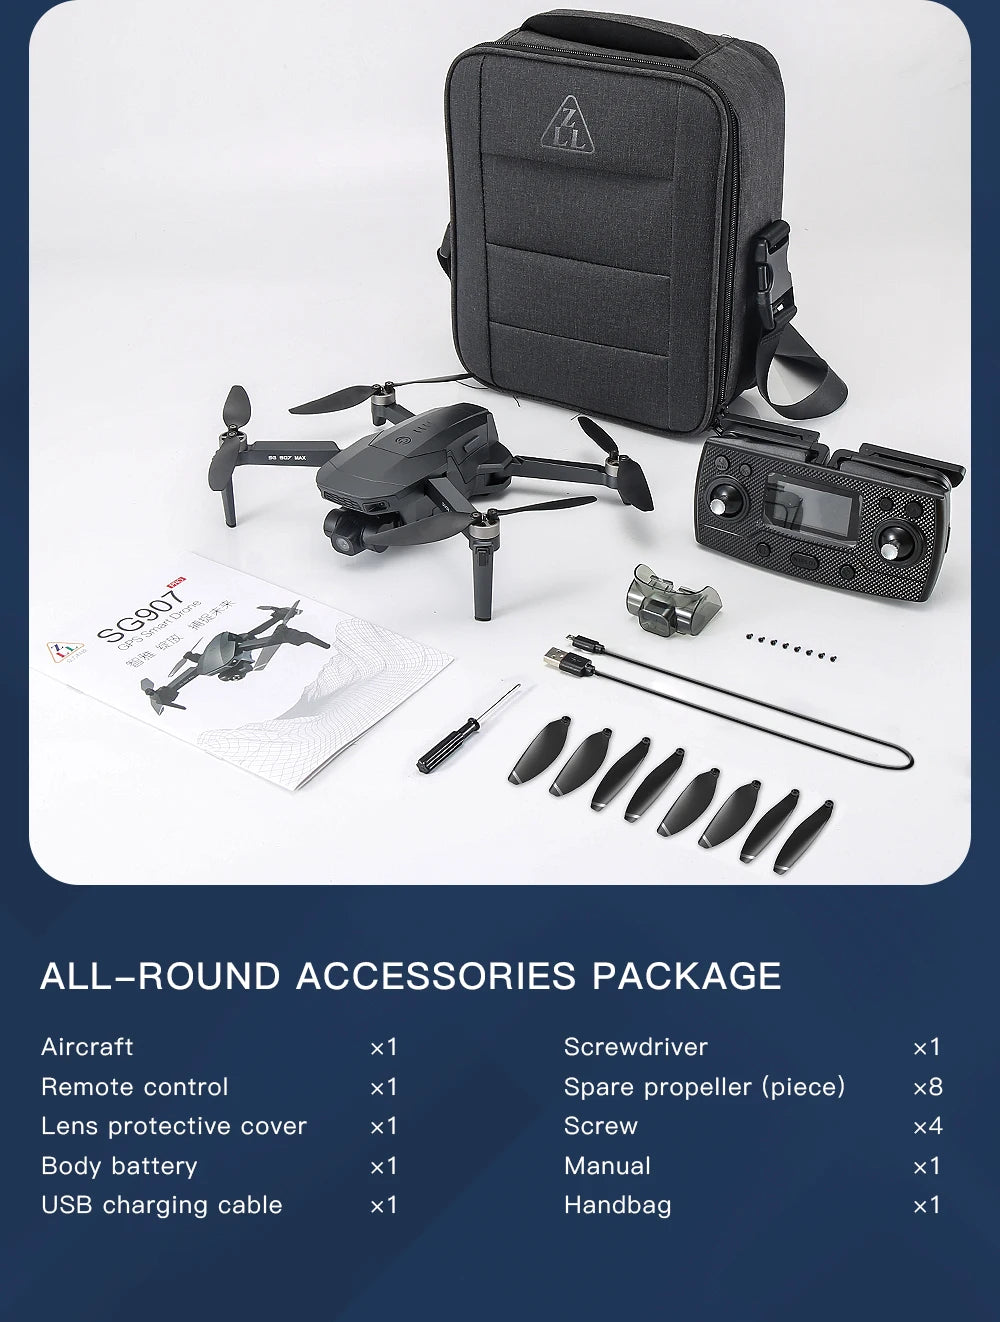 SG907 MAX Drone, ALL-ROUND ACCESSORIES PACKAGE Aircraft X1 Screwdrive